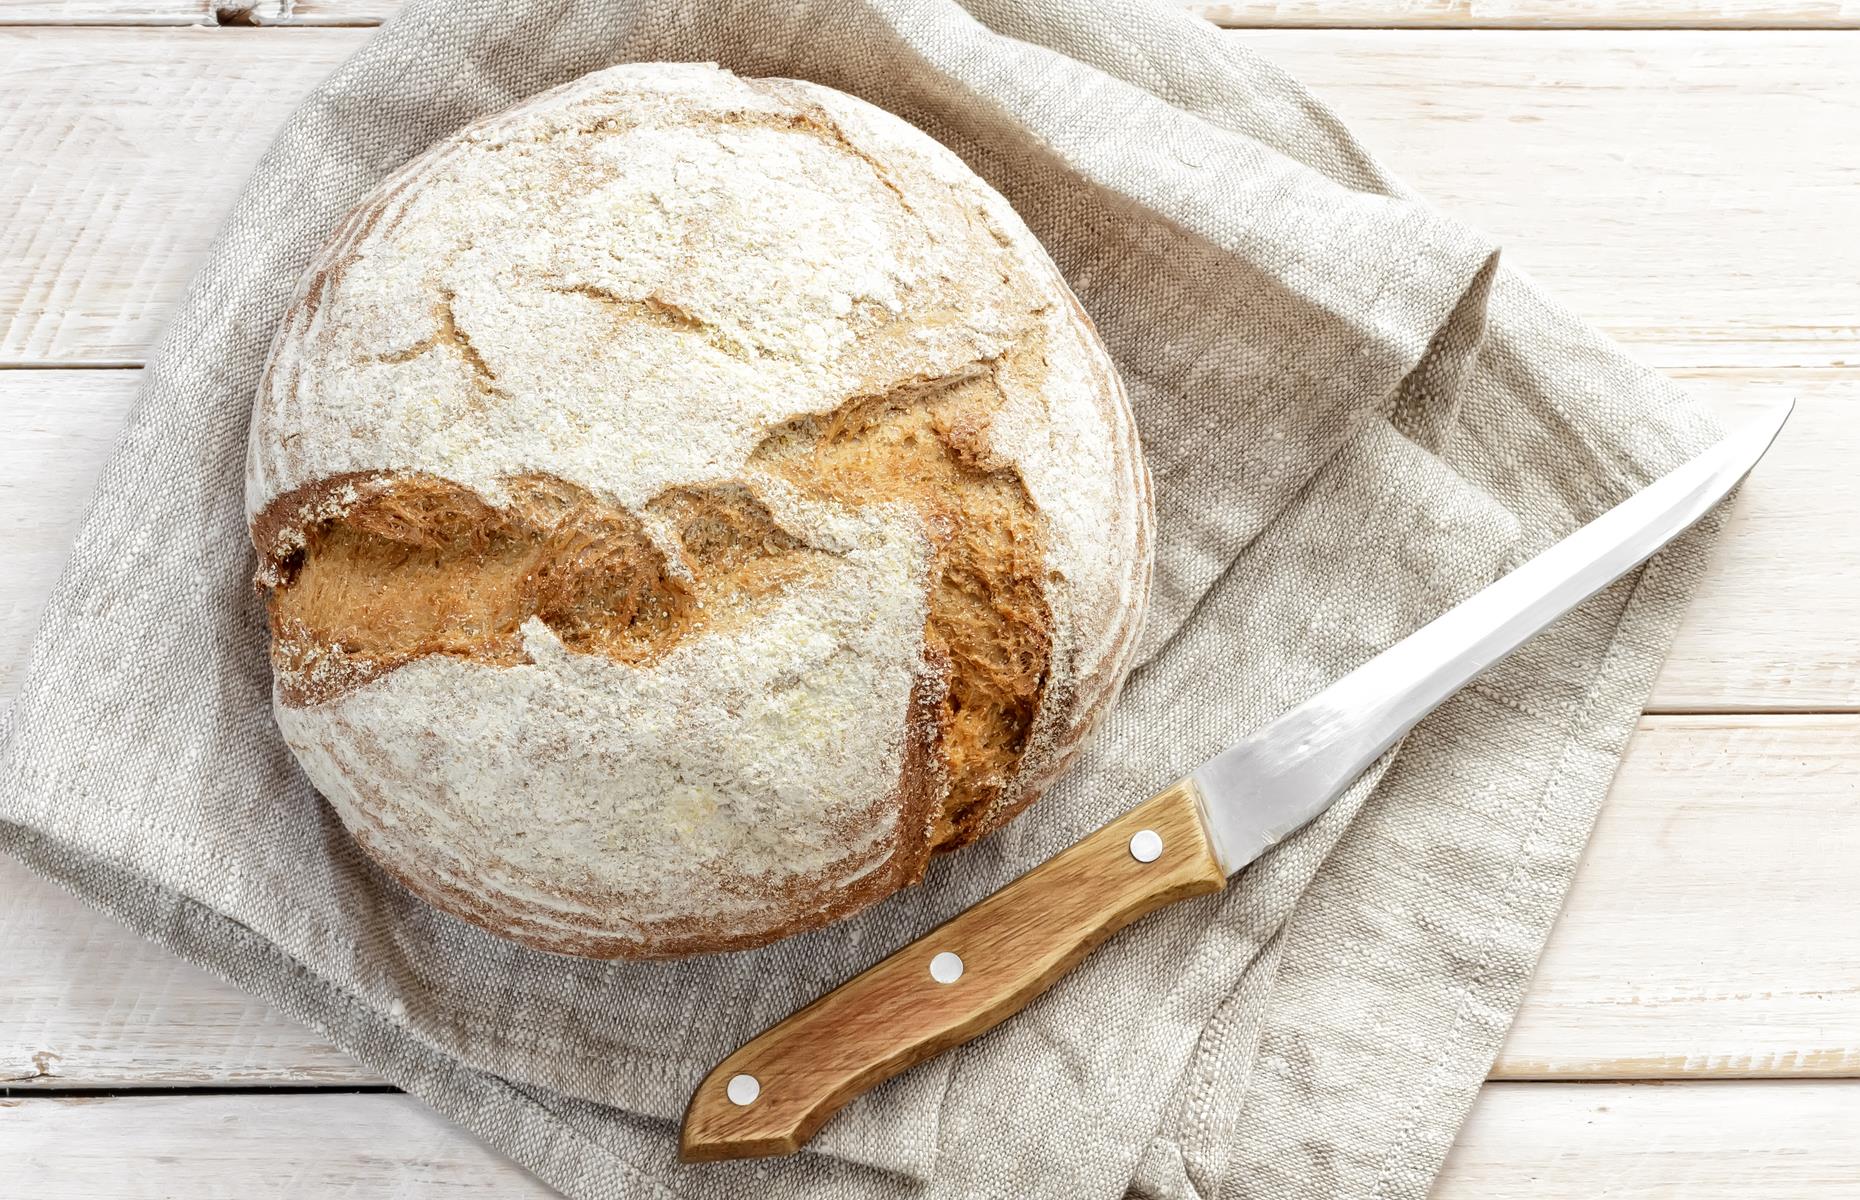 <p>The search is over: you really can make the perfect sourdough with this detailed step-by-step recipe. Sourdough isn't a quick process, with plenty of resting of the dough needed, but it's largely hands-off – and could result in your best loaf ever.</p>  <p><a href="https://www.lovefood.com/recipes/119842/easy-sourdough-bread-recipe"><strong>Get the recipe for easy sourdough loaf here</strong></a></p>  <p><em>Last updated by Emily Shardlow-Price.</em></p>